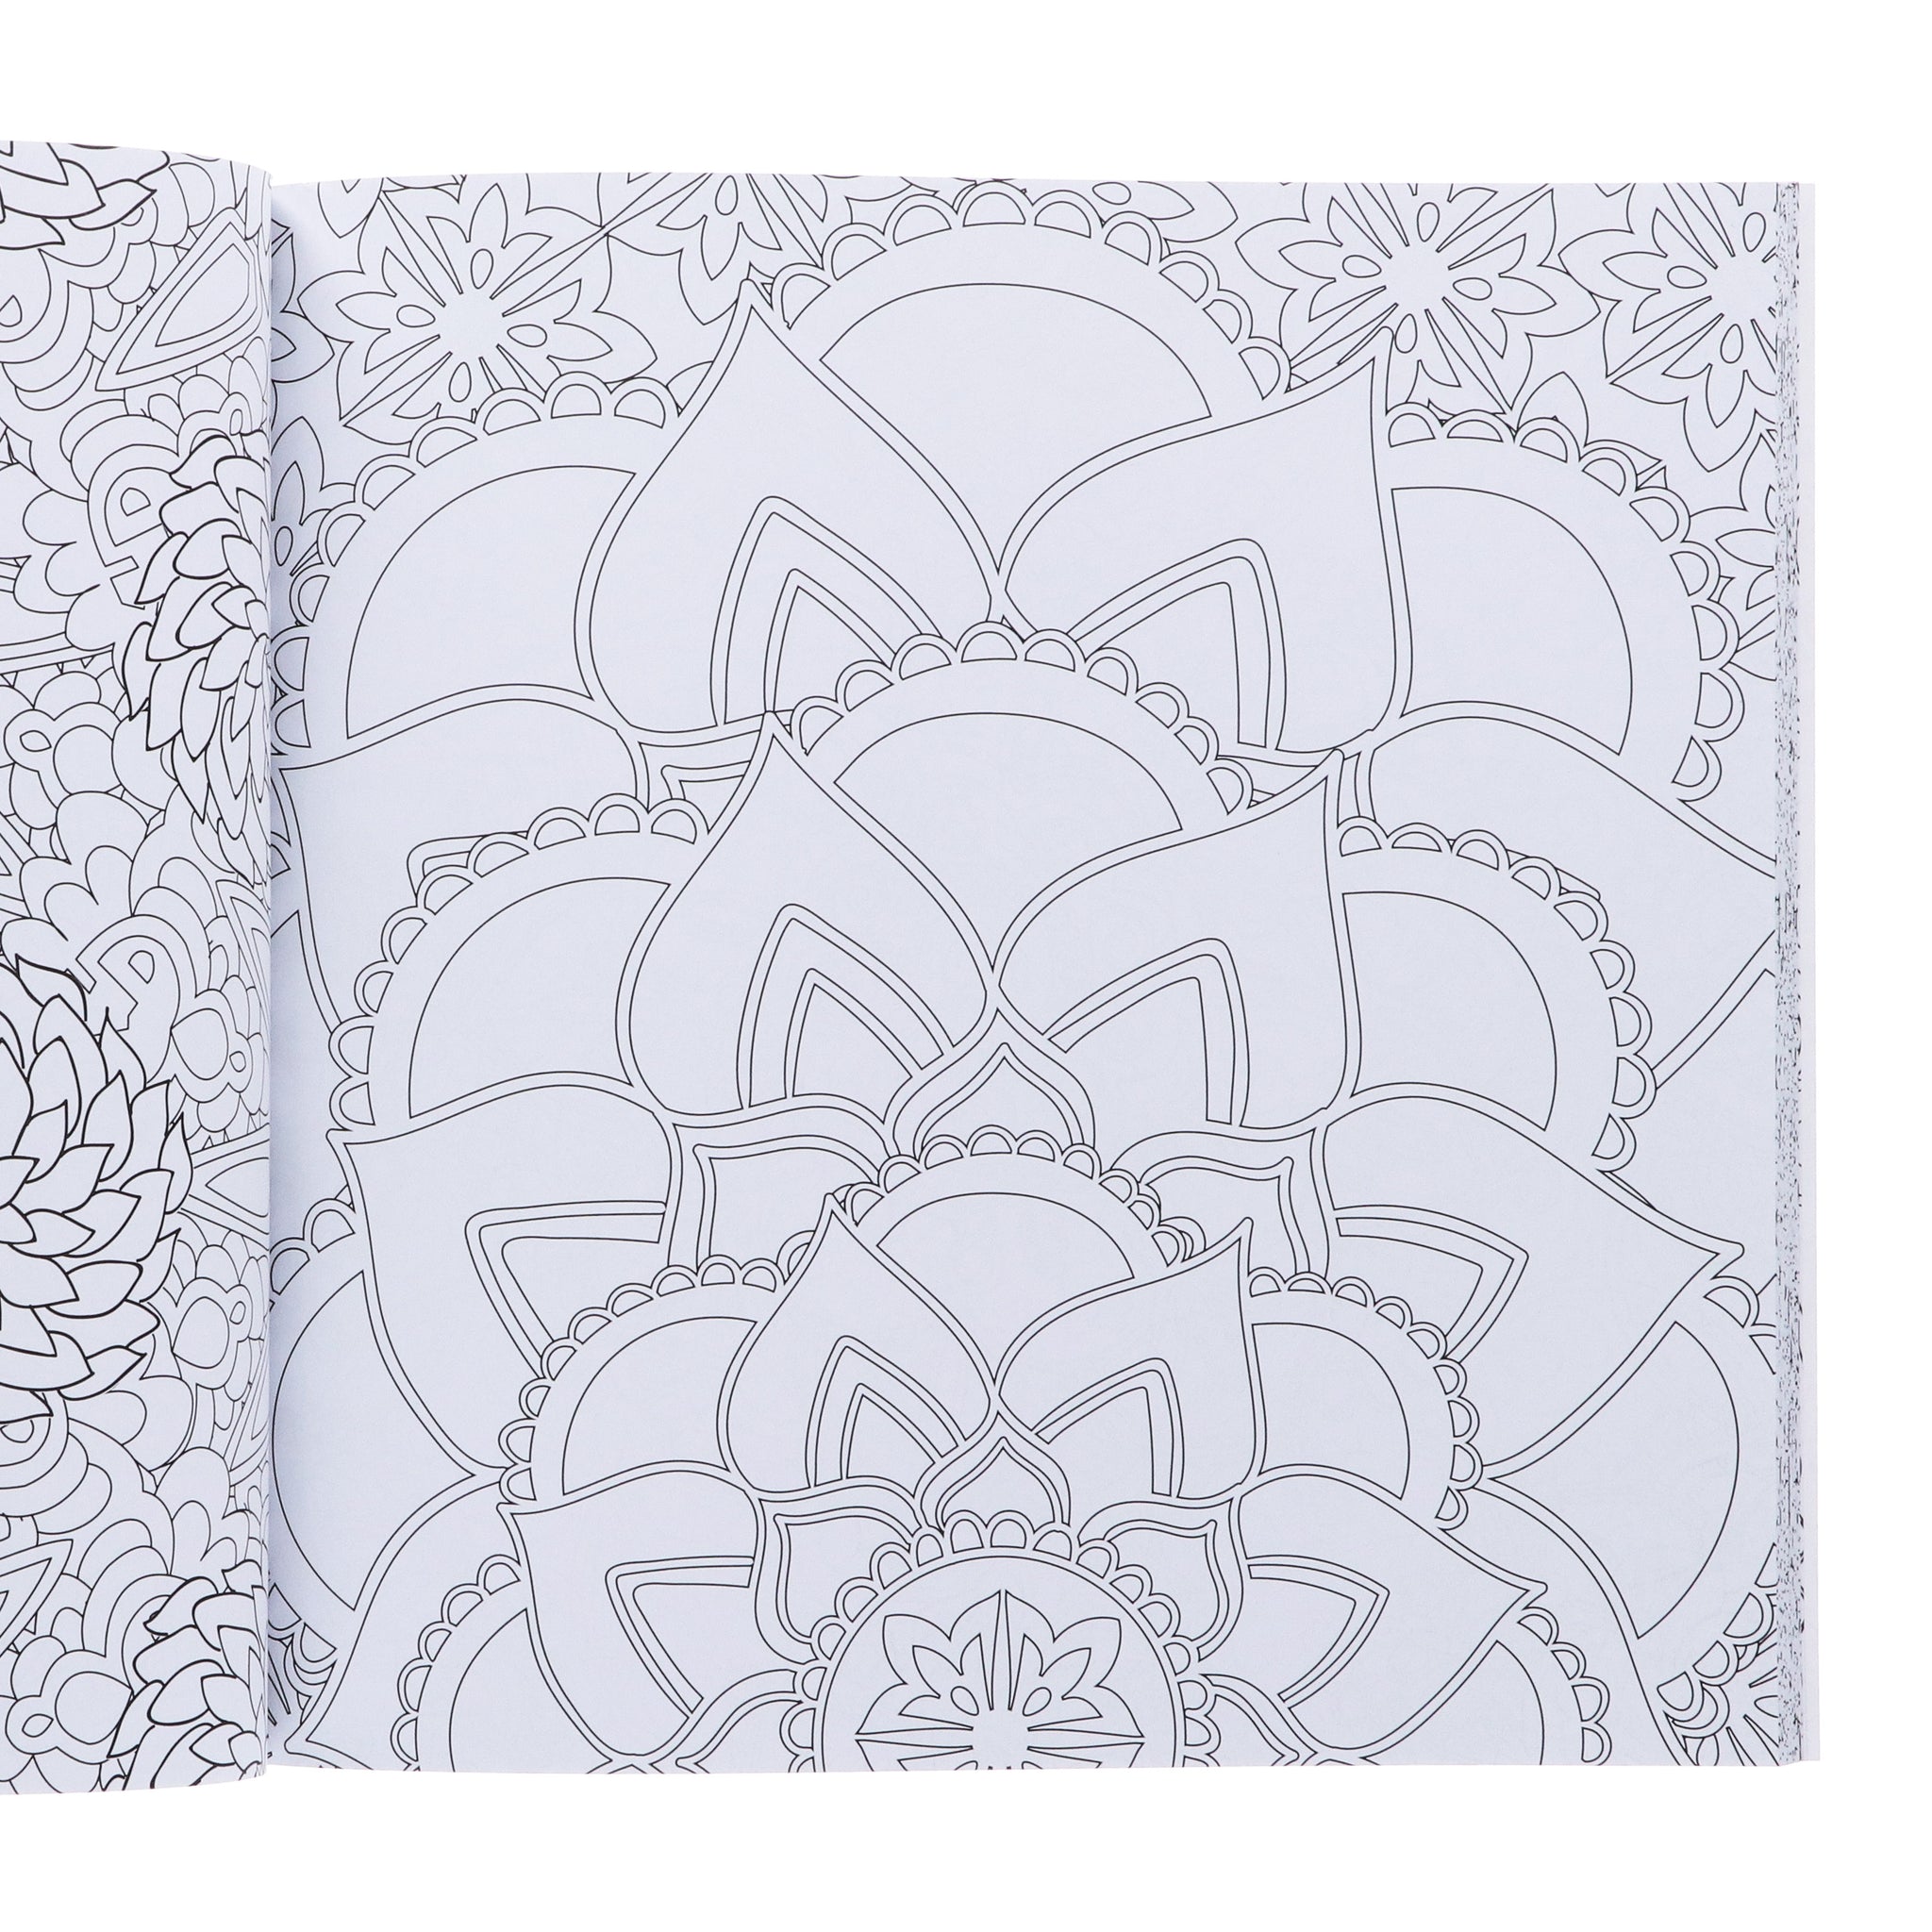 Spiral Coloring Page for Adults Vol.13 Graphic by Fleur de Tango